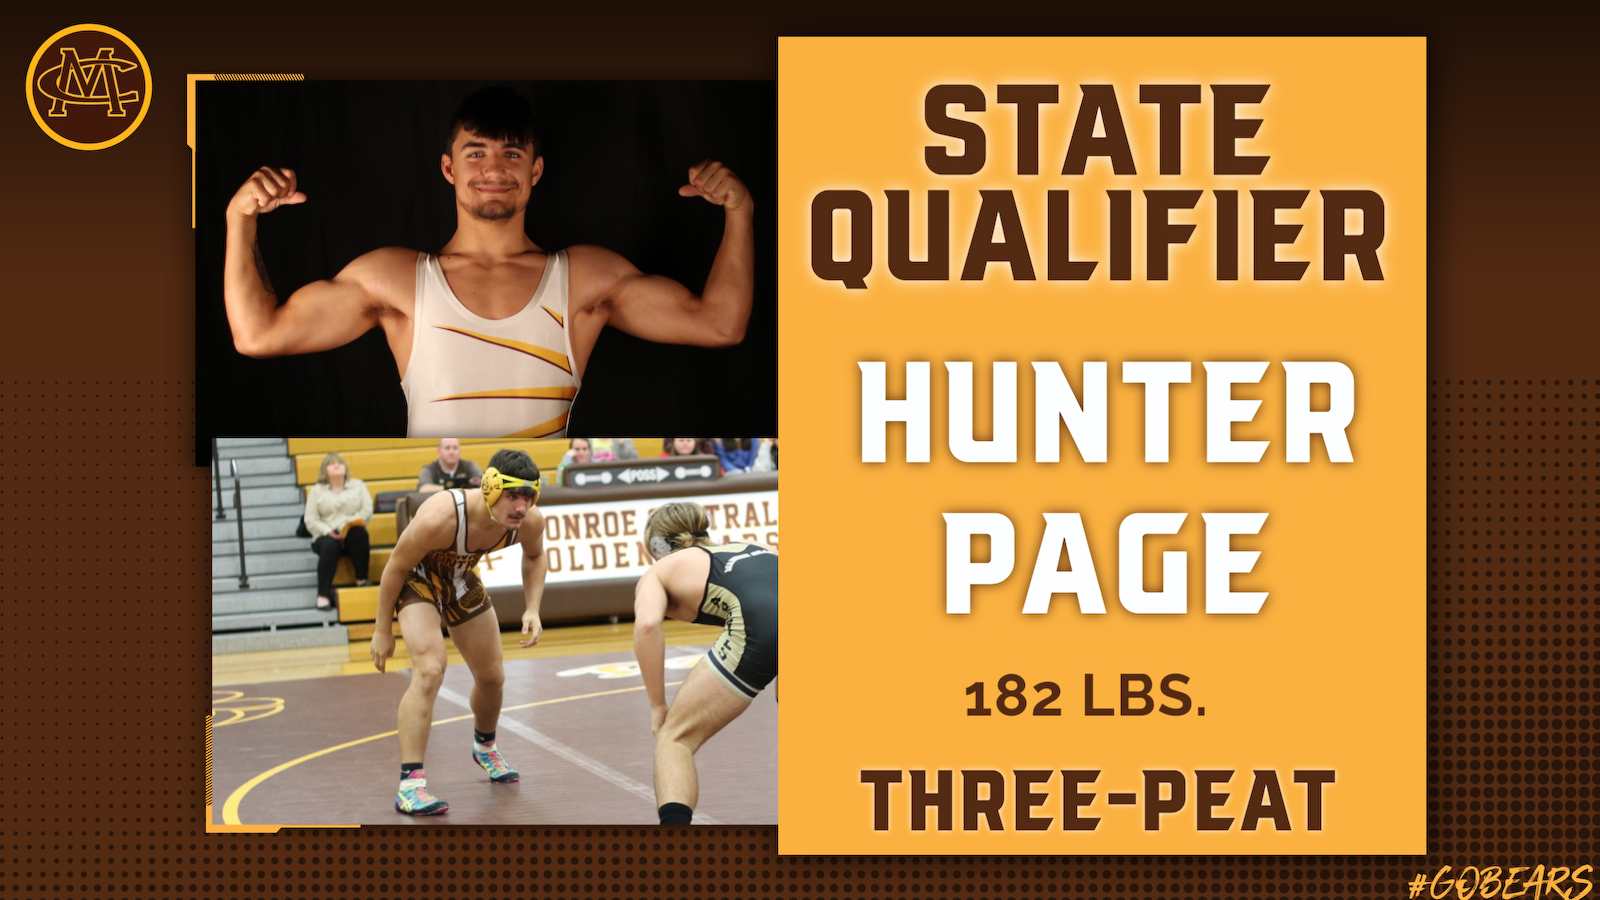 Hunter Pages makes history; Qualifies for State cover photo